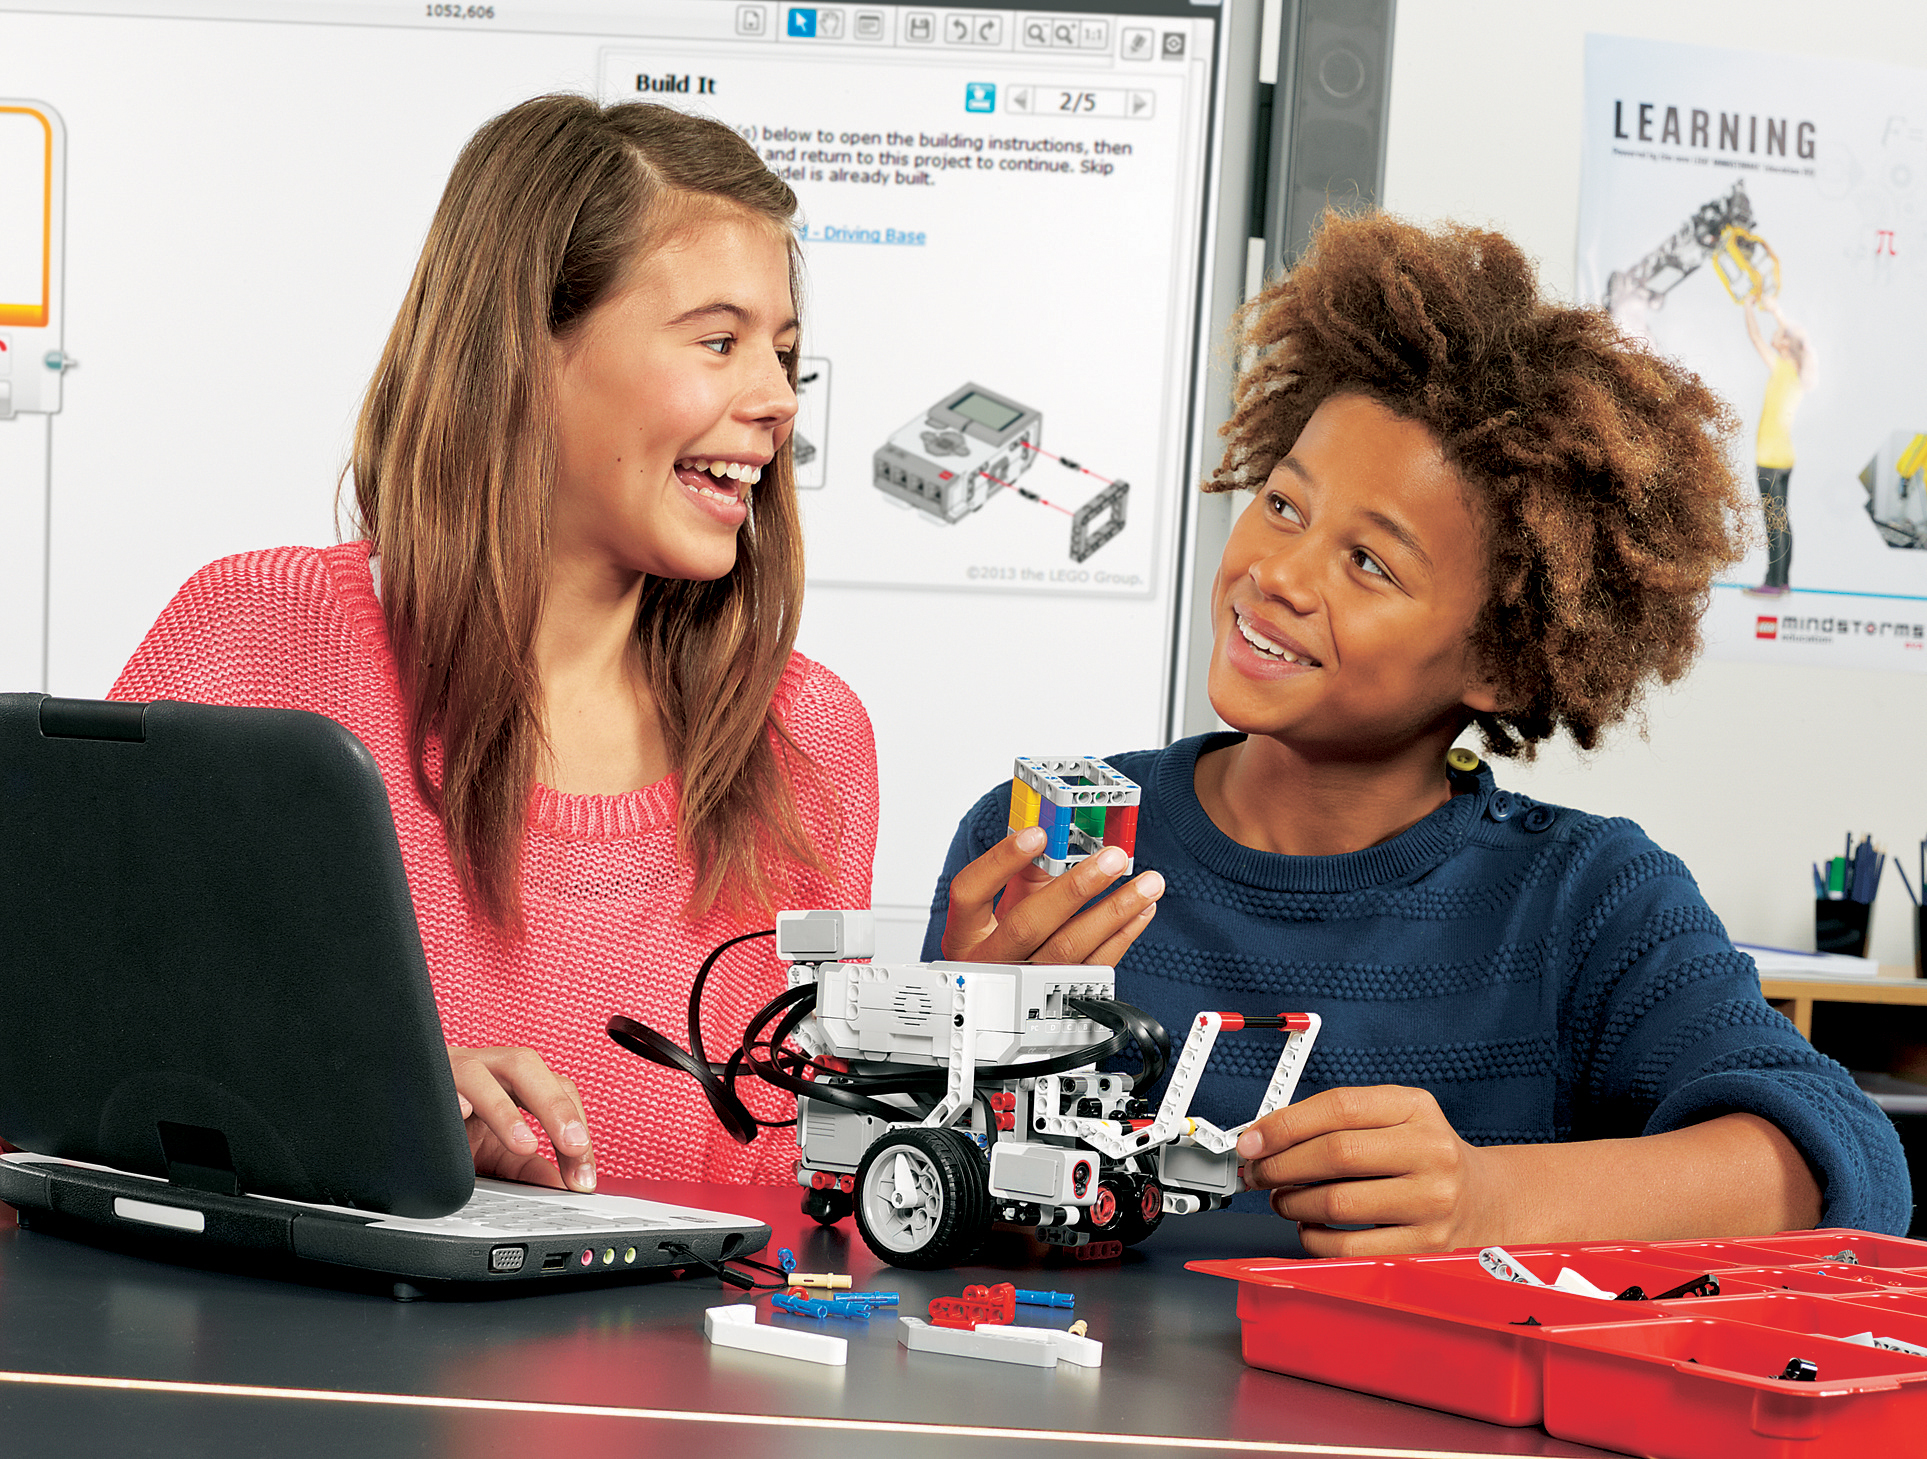 Educational robot packages for schools: Lego, Ozobot, Thymio...